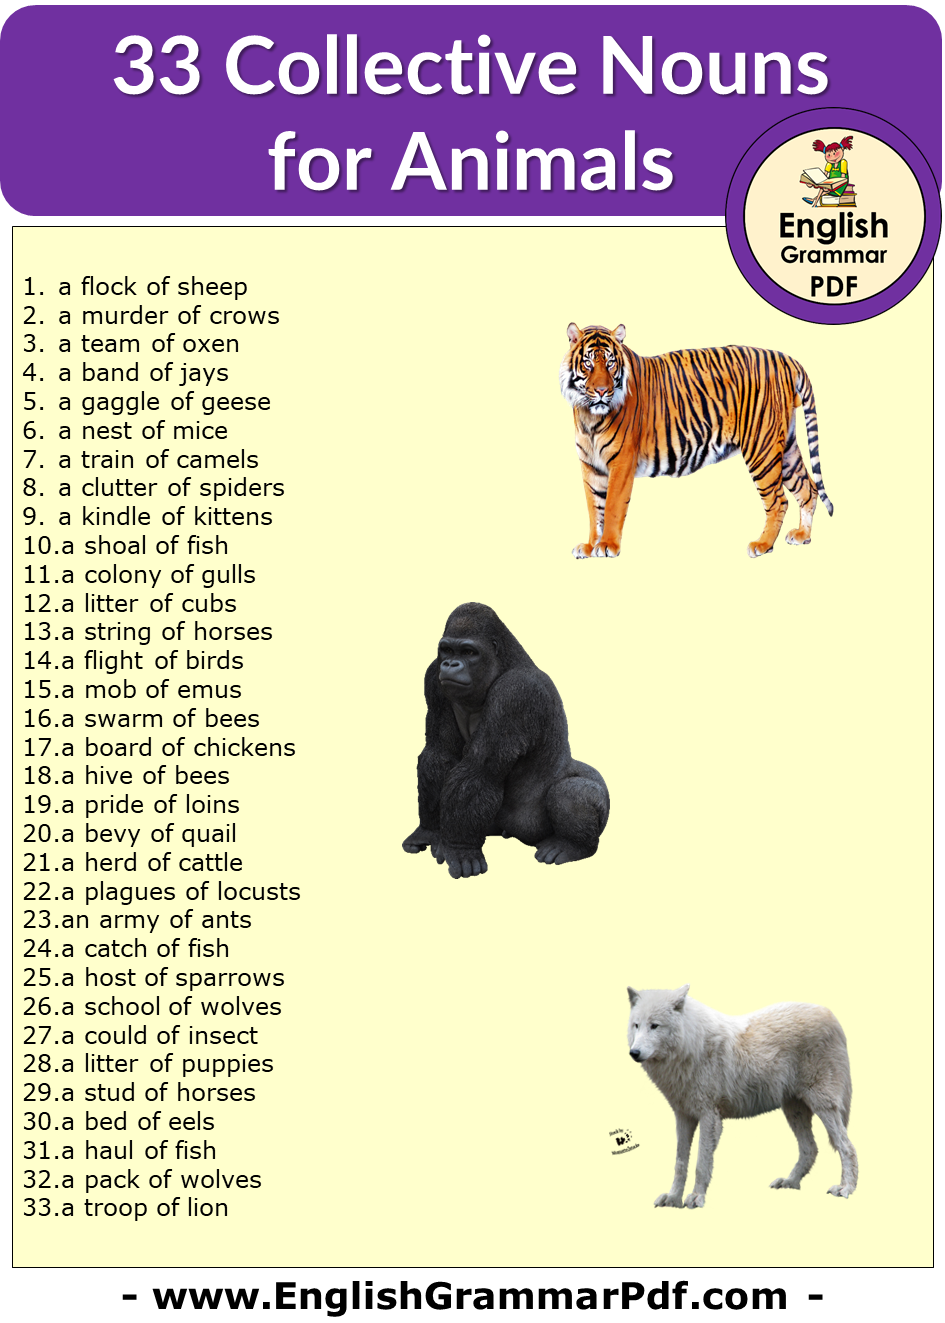 33 collective nouns for animals